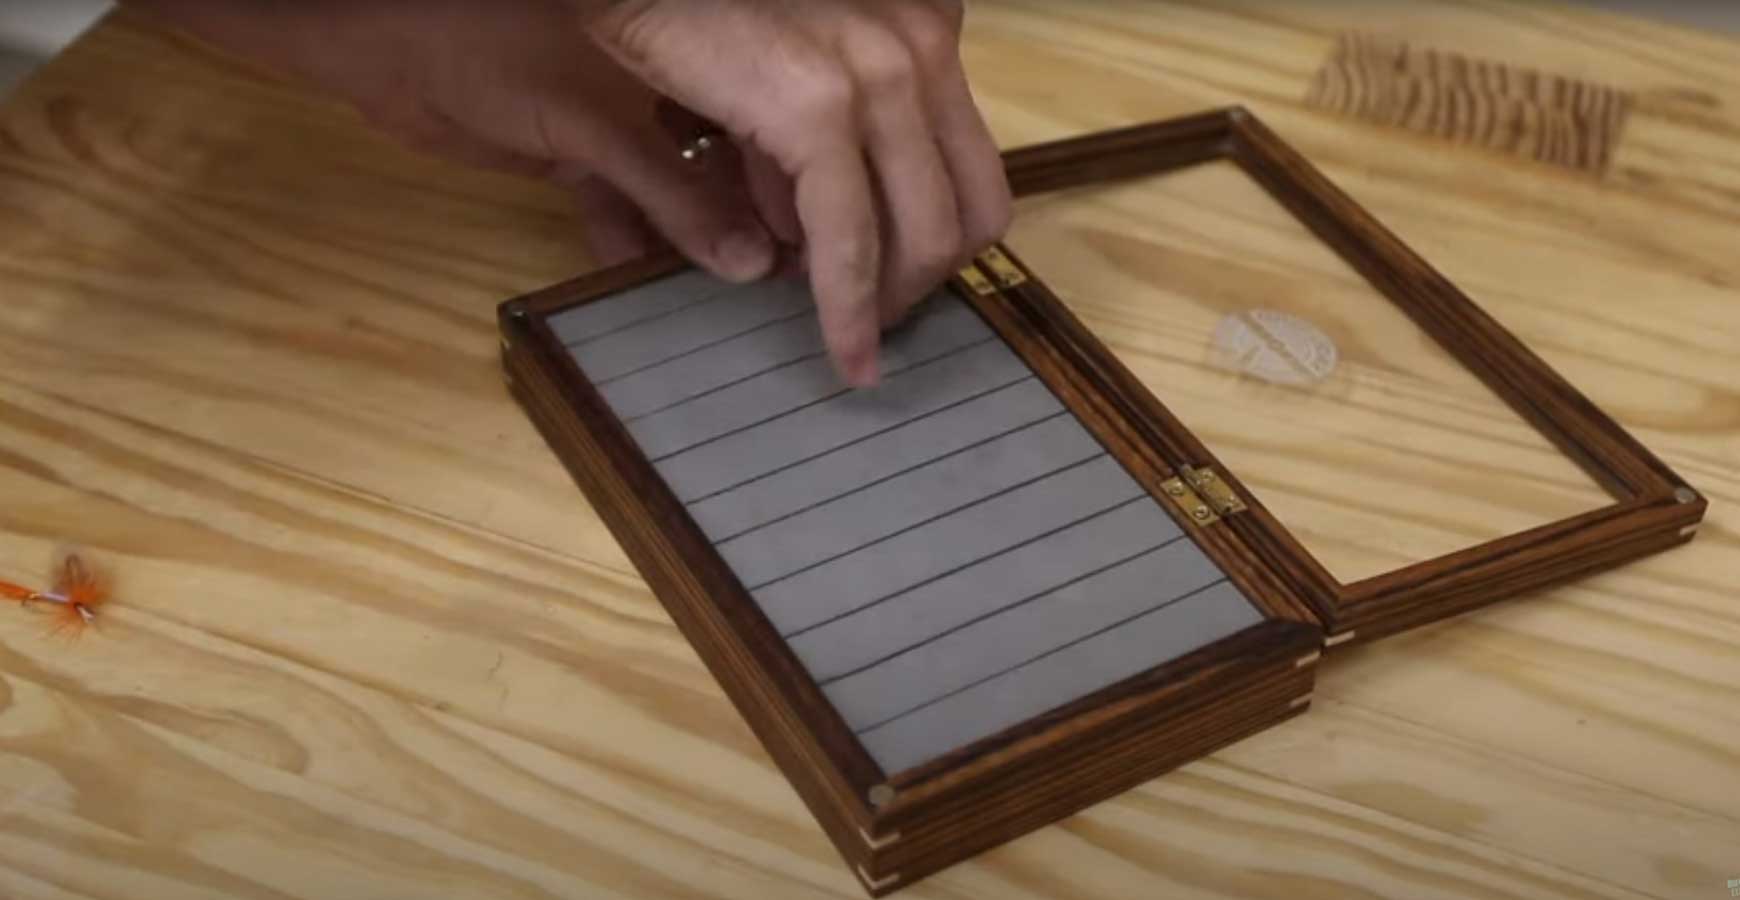 How to Make a Wooden Fly Box